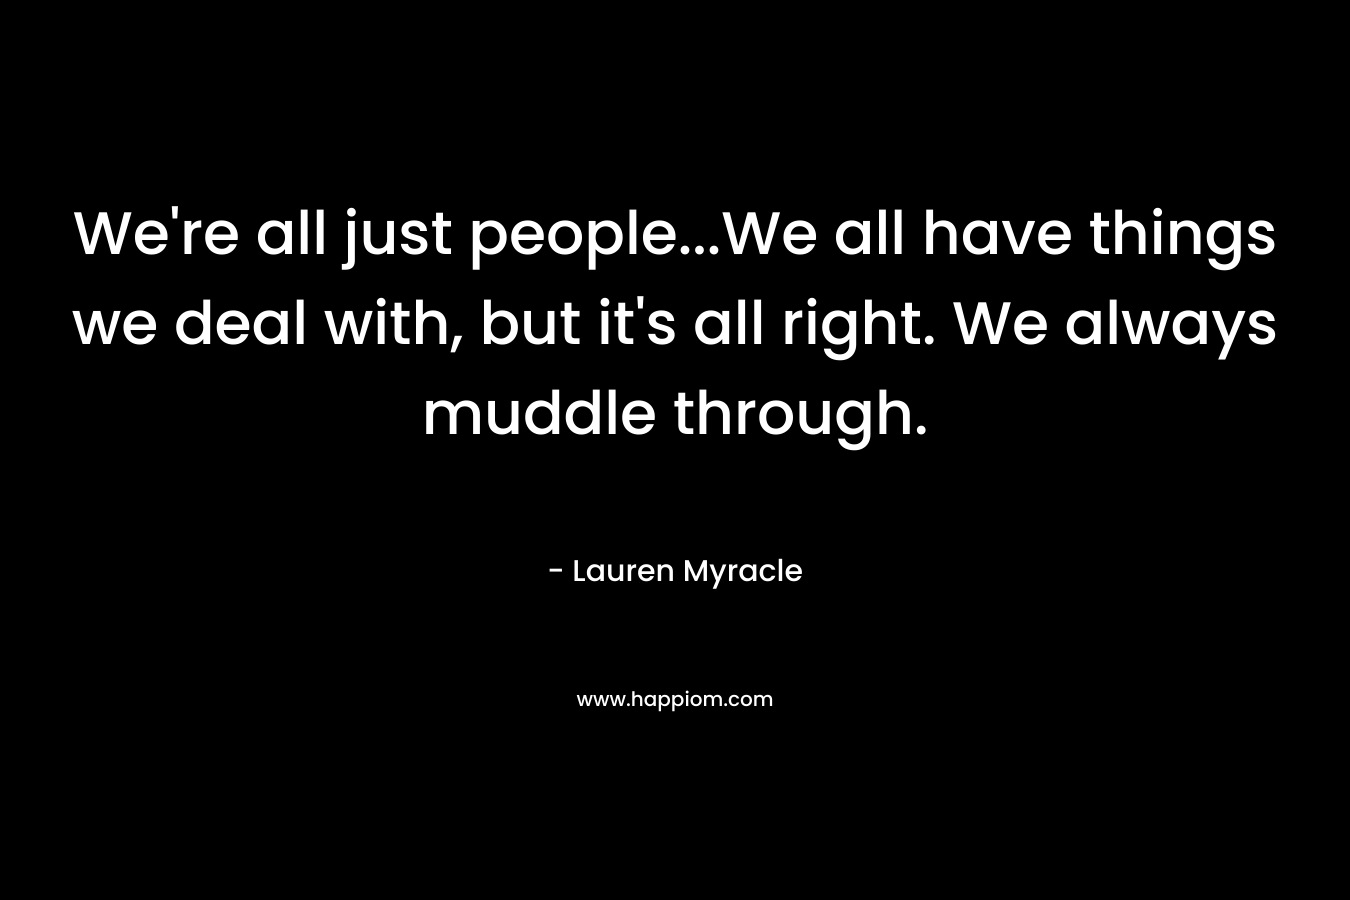 We're all just people...We all have things we deal with, but it's all right. We always muddle through.